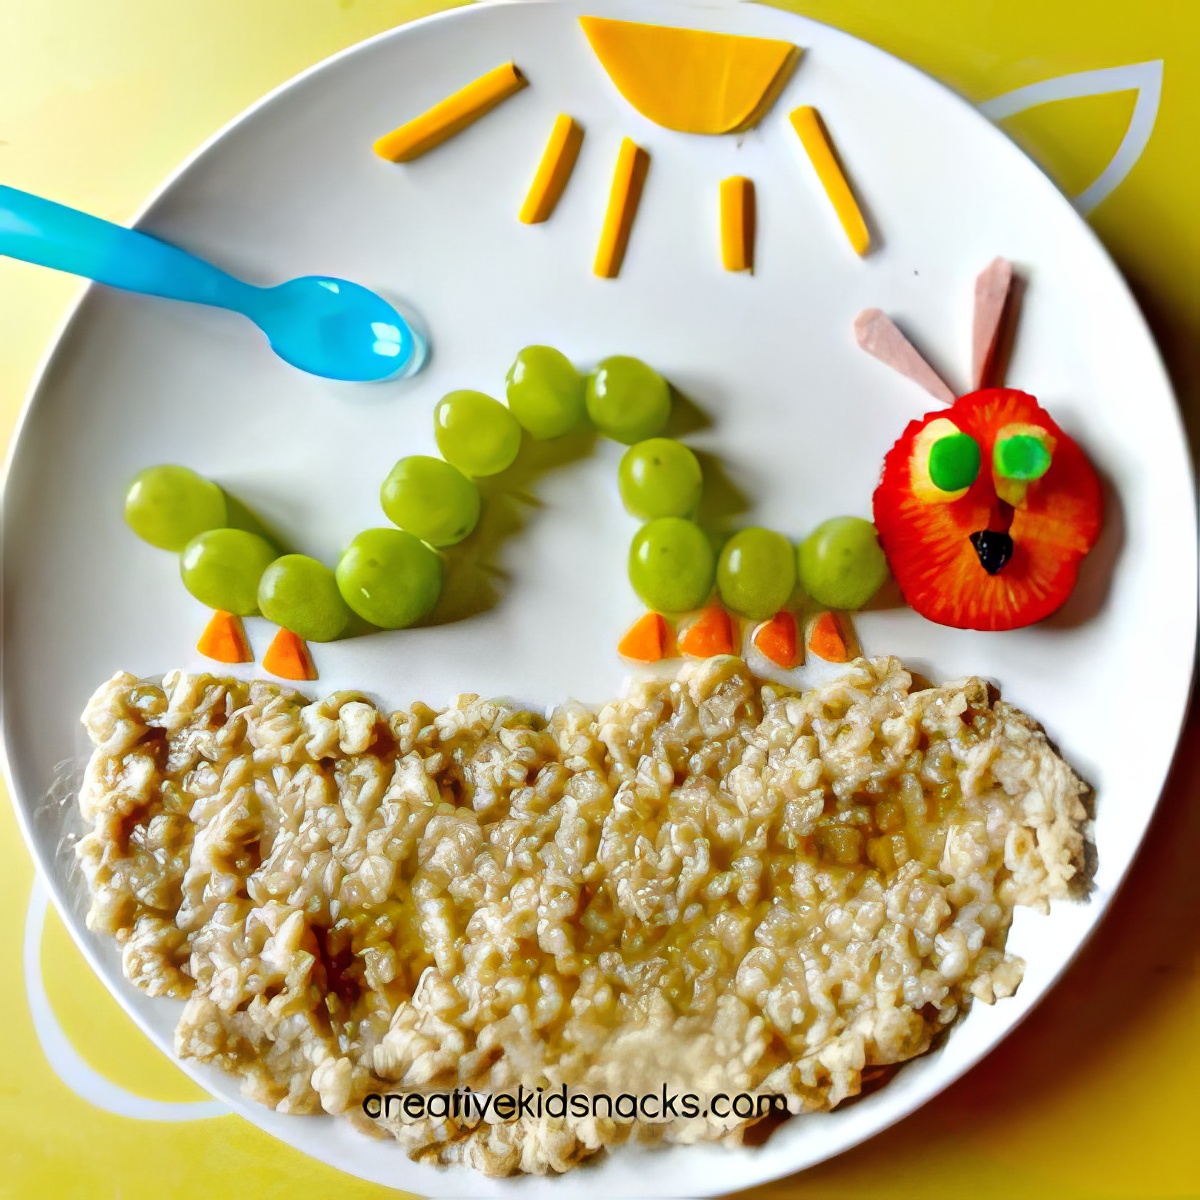 Be creative with your kids as you make this super yummy hungry caterpillar recipe!